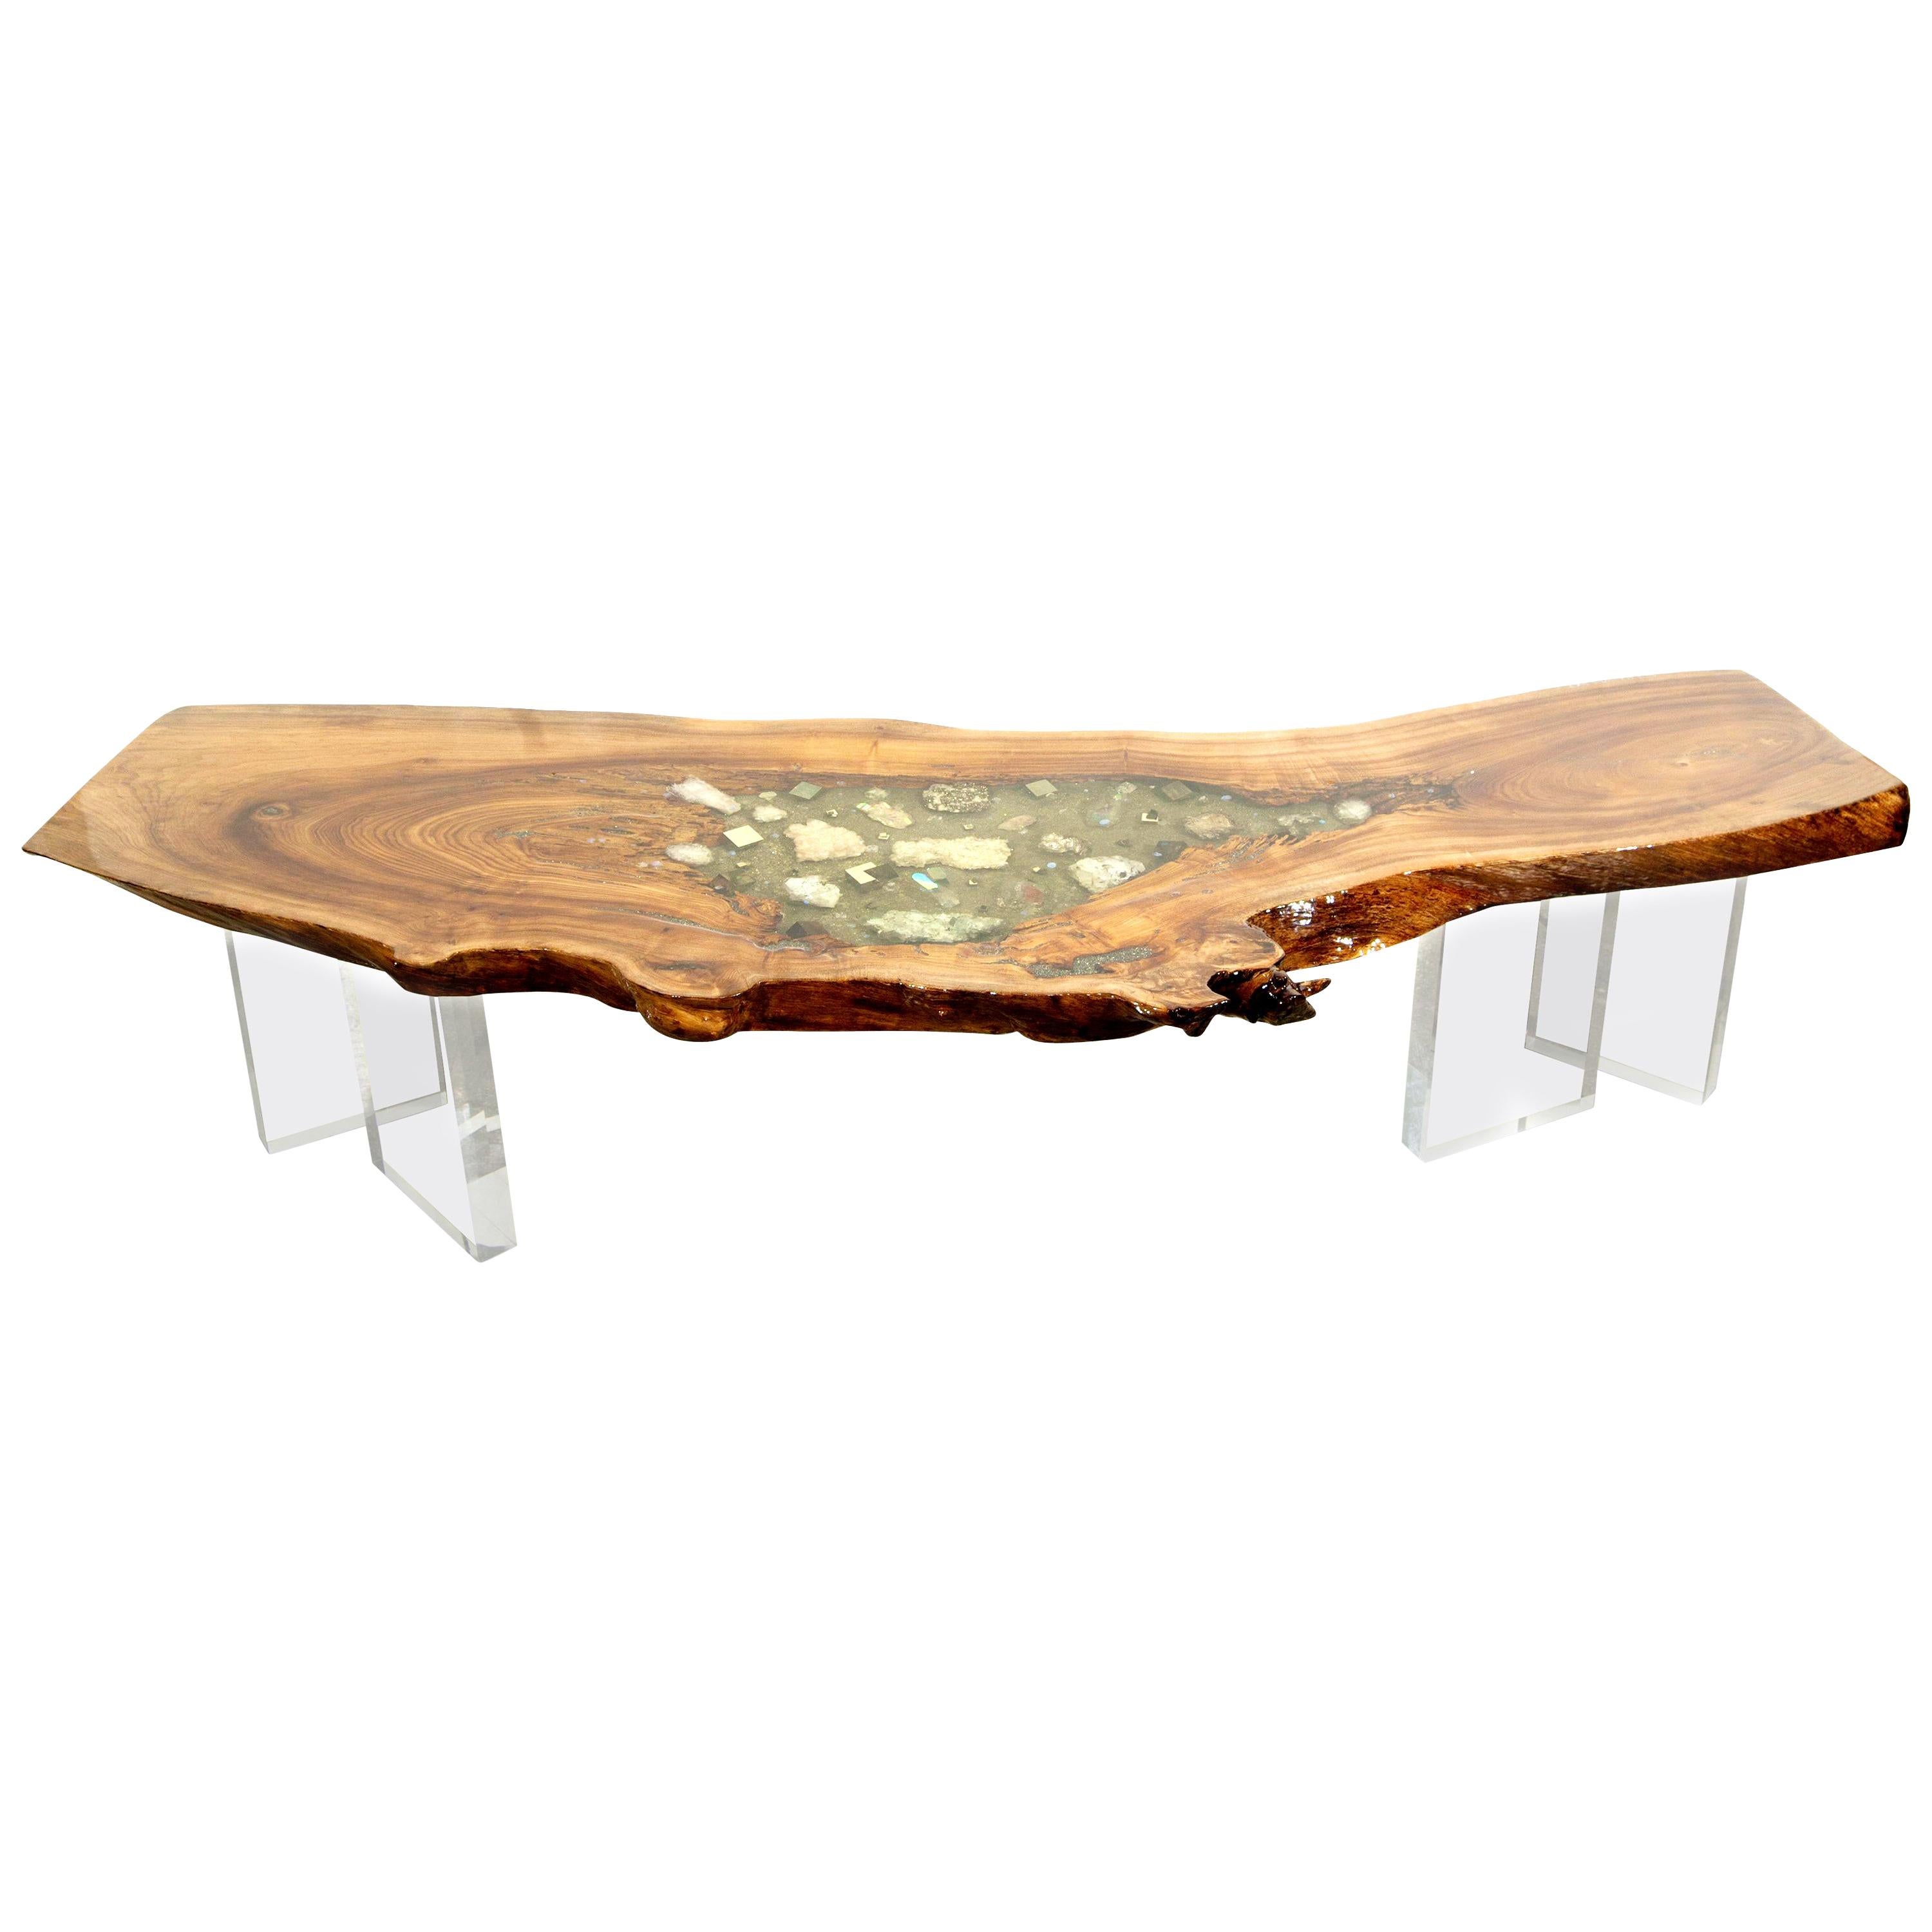 English Elm Wood Coffee Table Quartz, Pyrite Inlays Lucite Base by Danna Weiss  For Sale